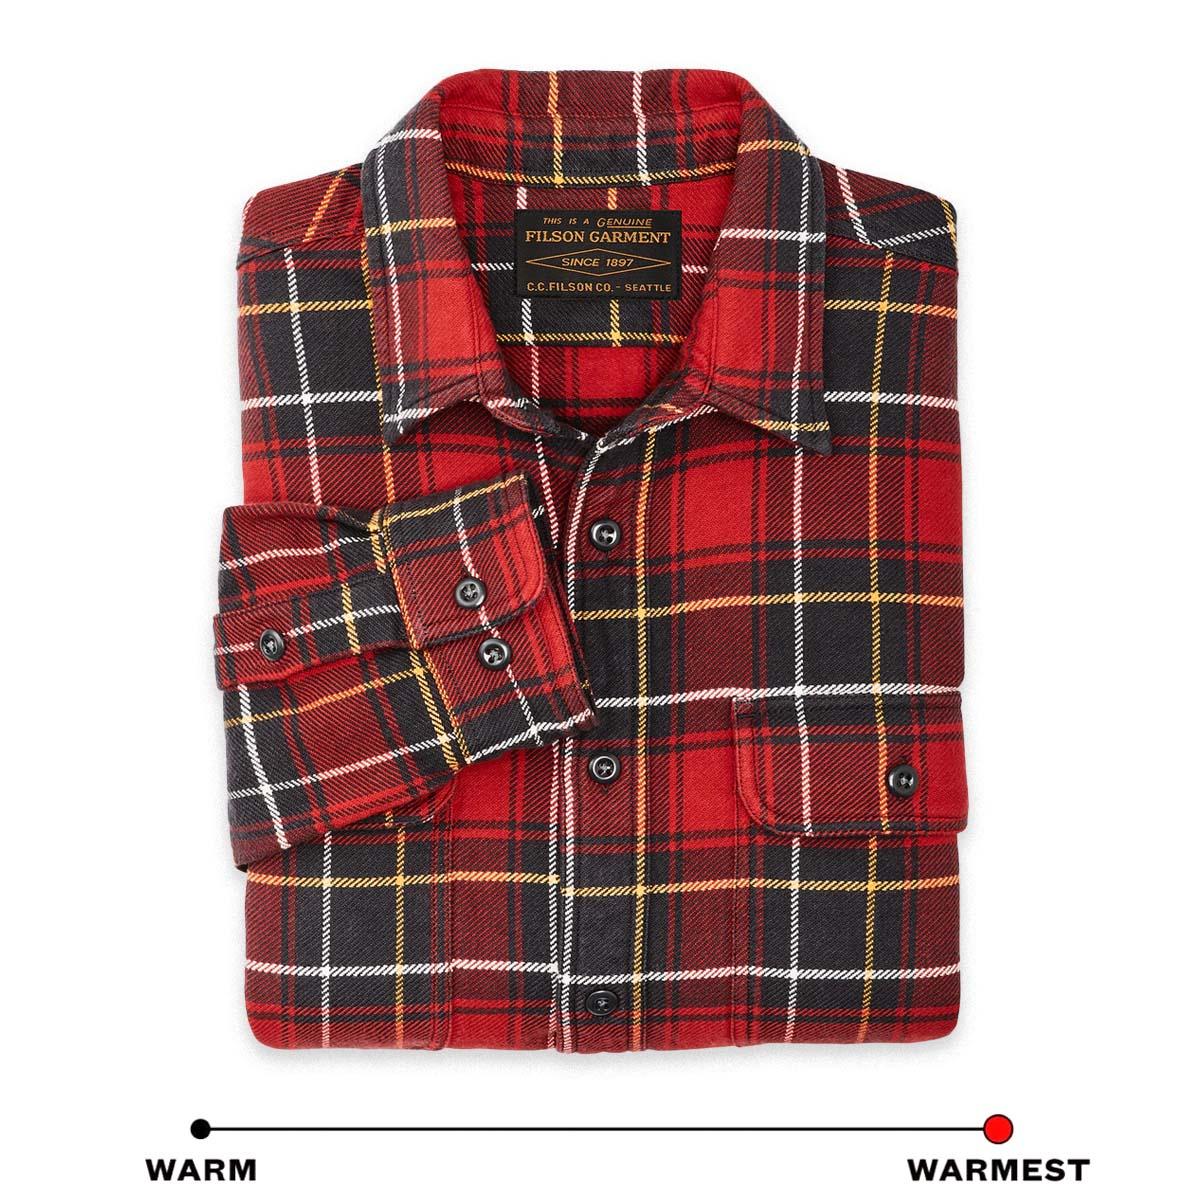 Filson Vintage Flannel Work Shirt Red Charcoal Plaid, built with thick and breathable cotton flannel, it’s ideal for cold weather